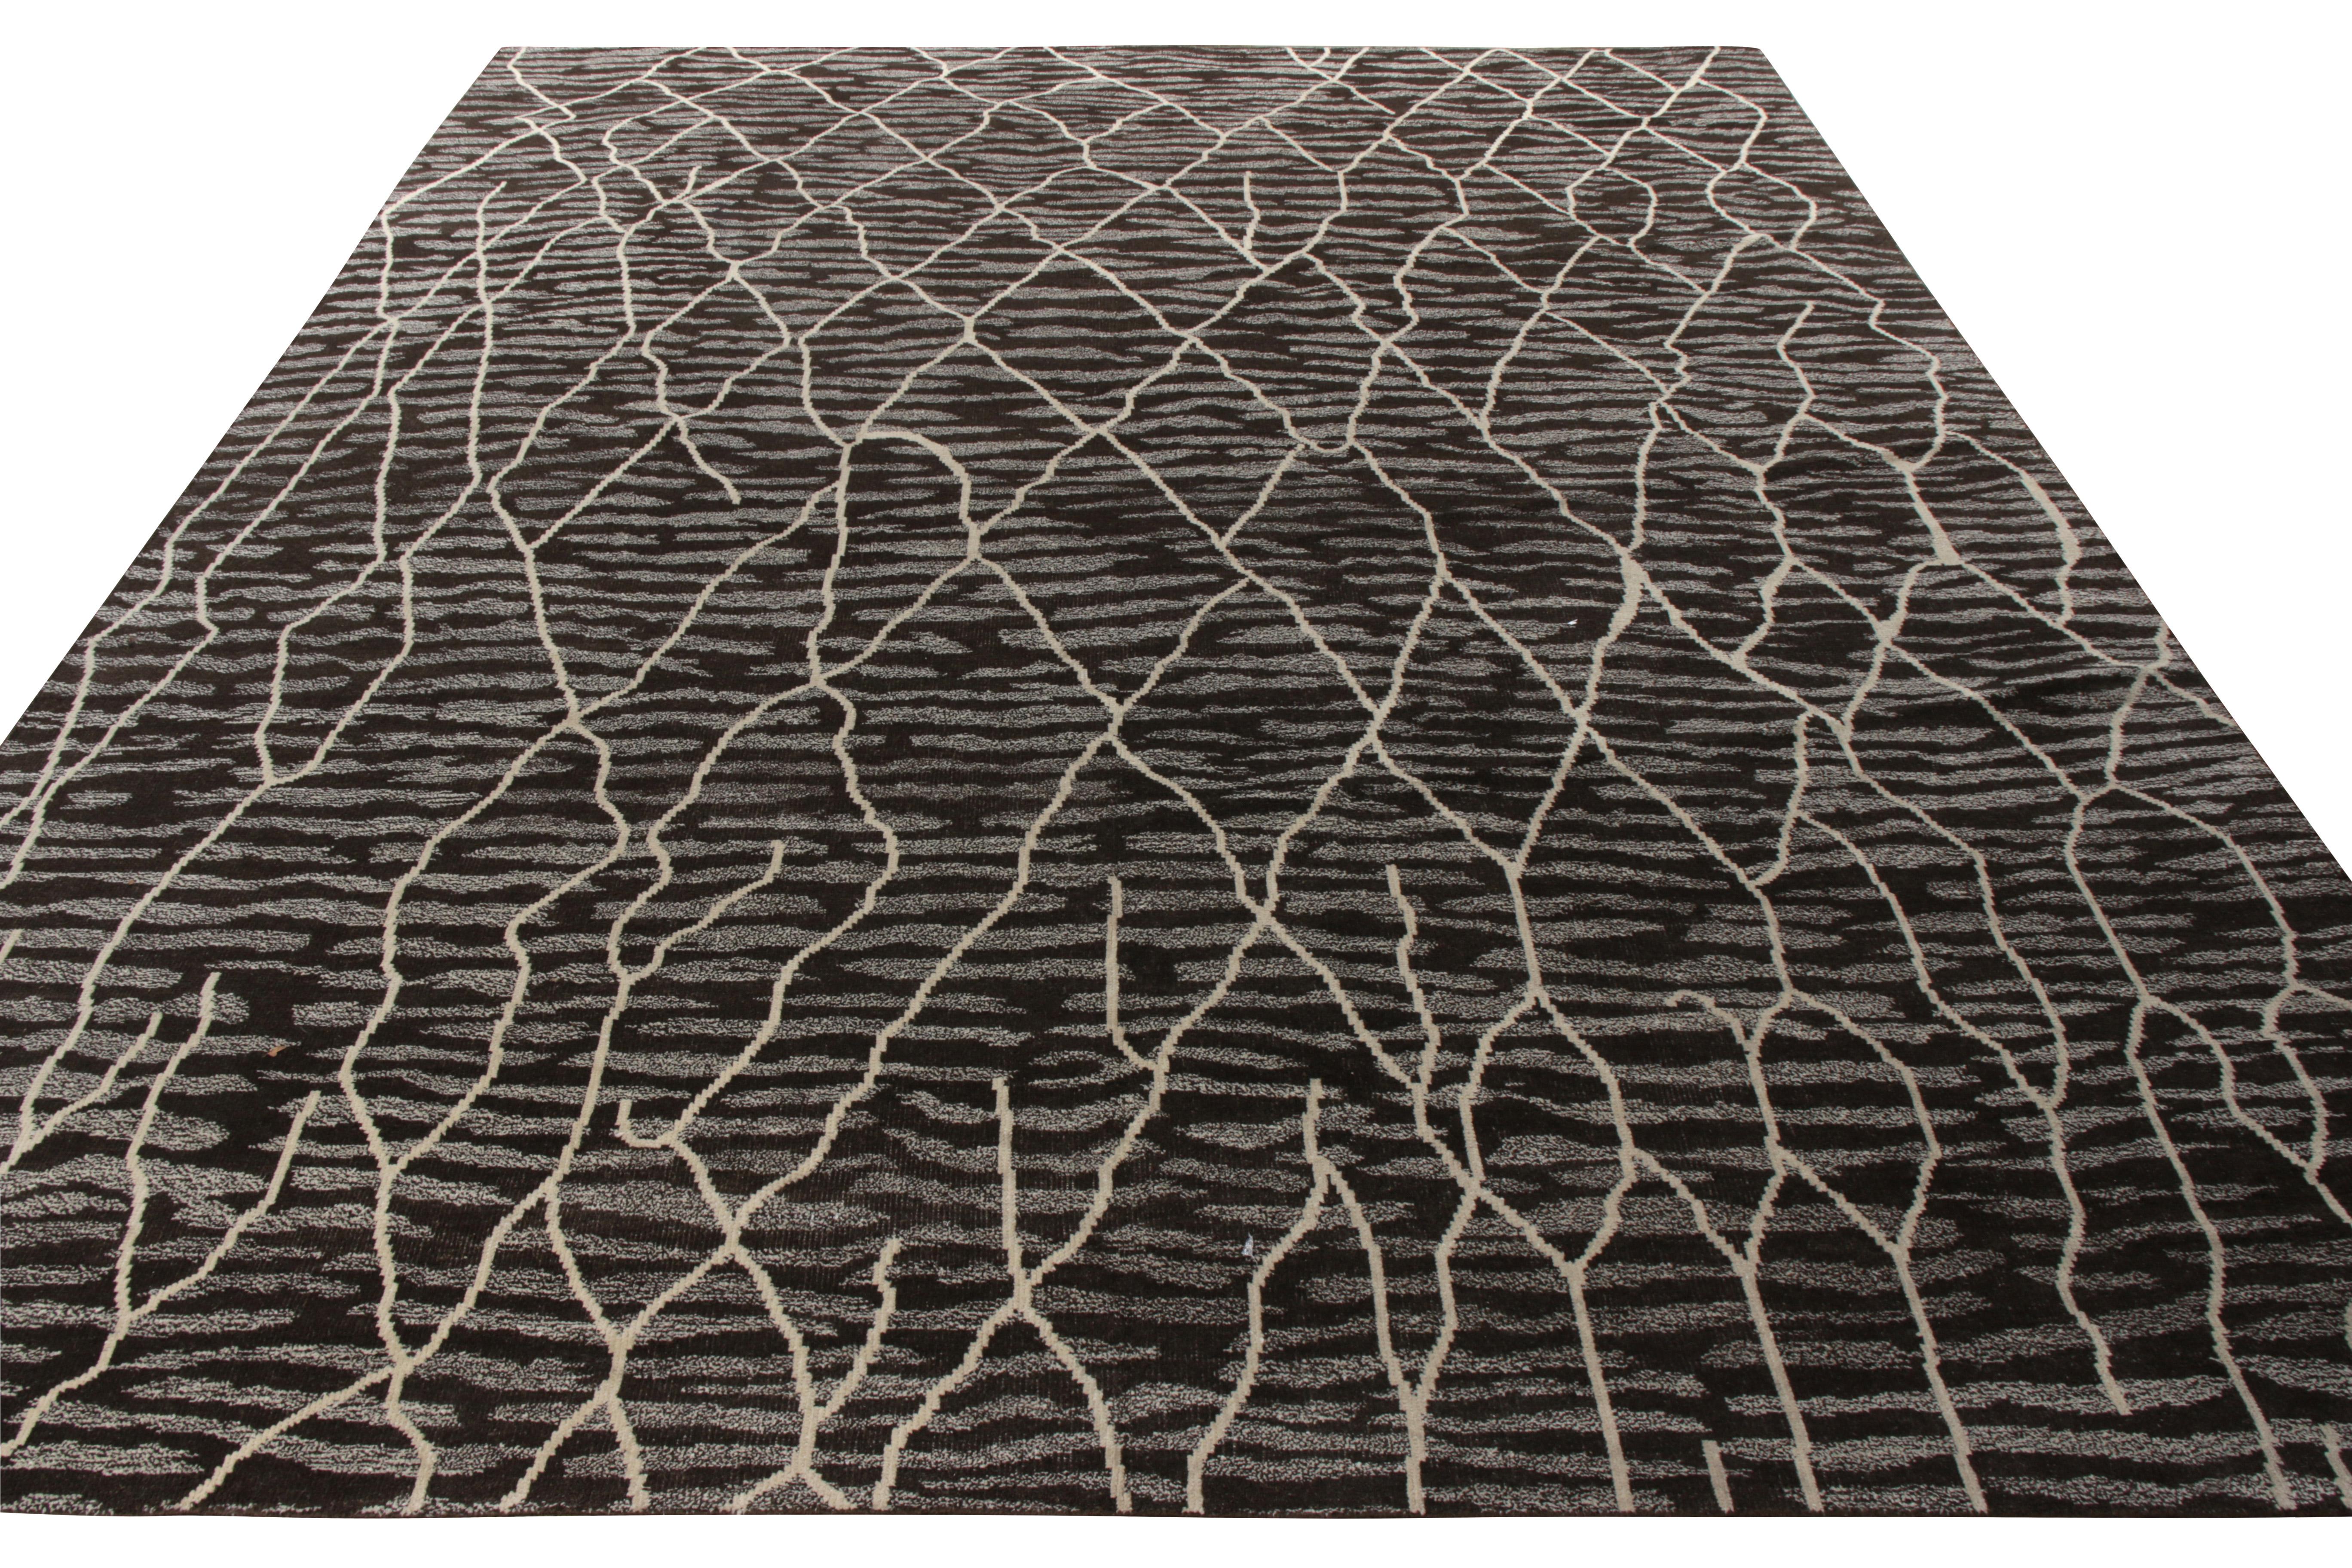 A 12x15 example of a hand-knotted custom piece available from Rug & Kilim’s New & Modern Collection. This ambitious drawing dons a modern vibe with an amalgam of geometric patterns and a repetitive striation playing intriguingly with the trellis